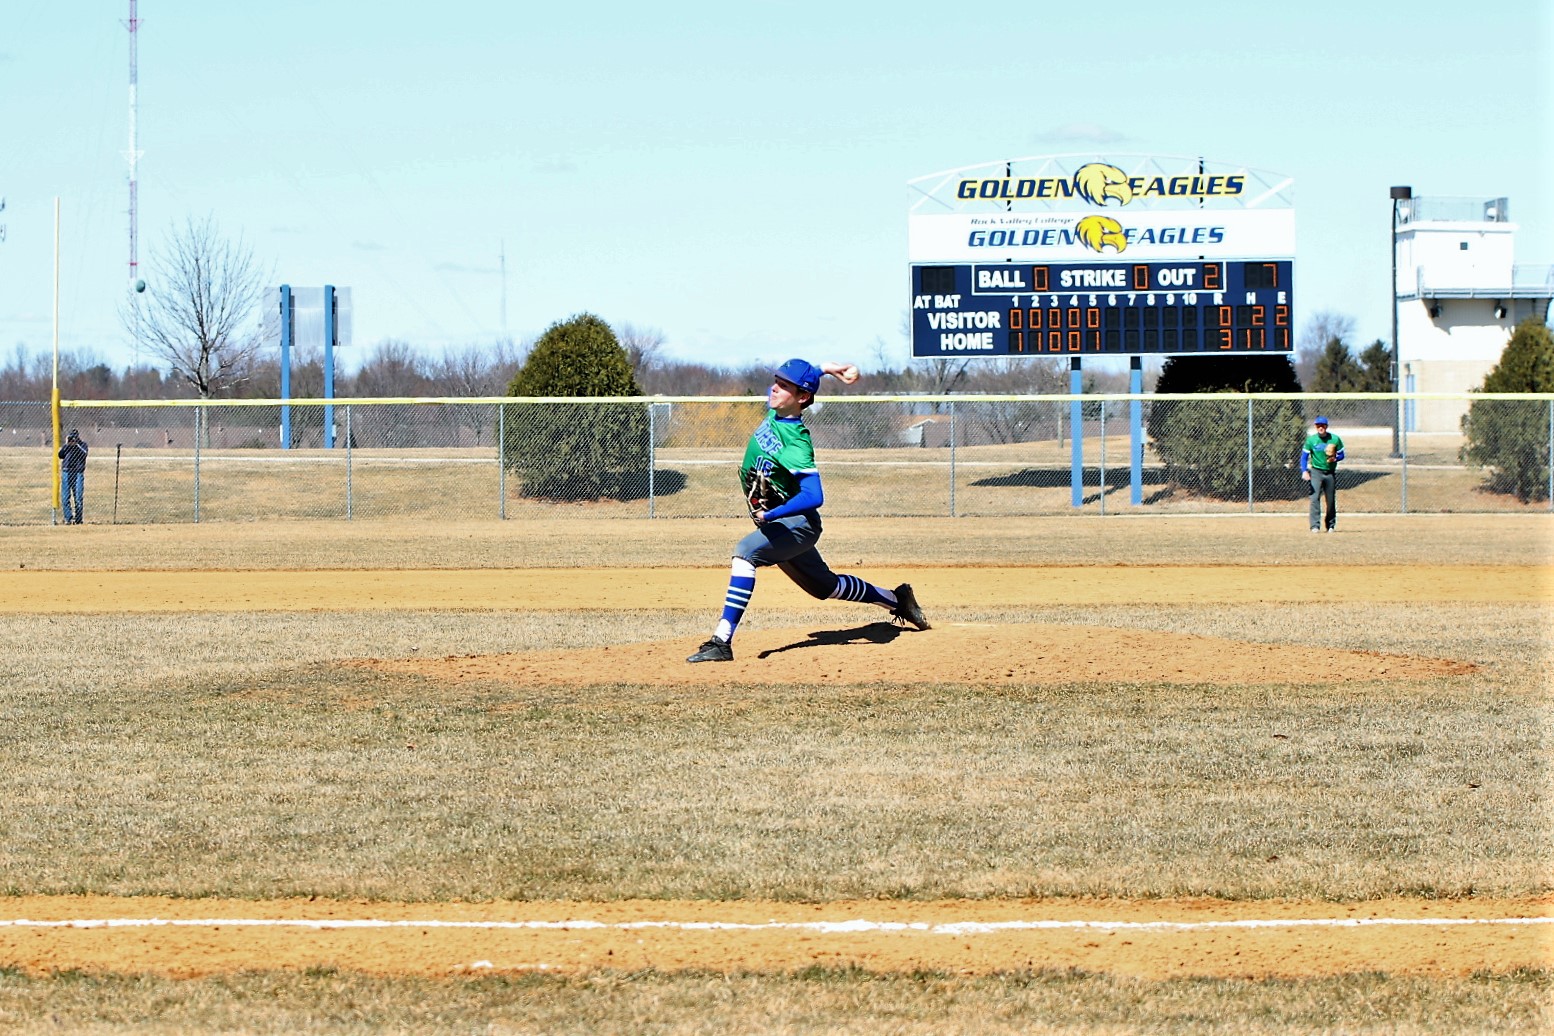 Connor Olson about to release a pitch, Rock Valley scoreboard in the background